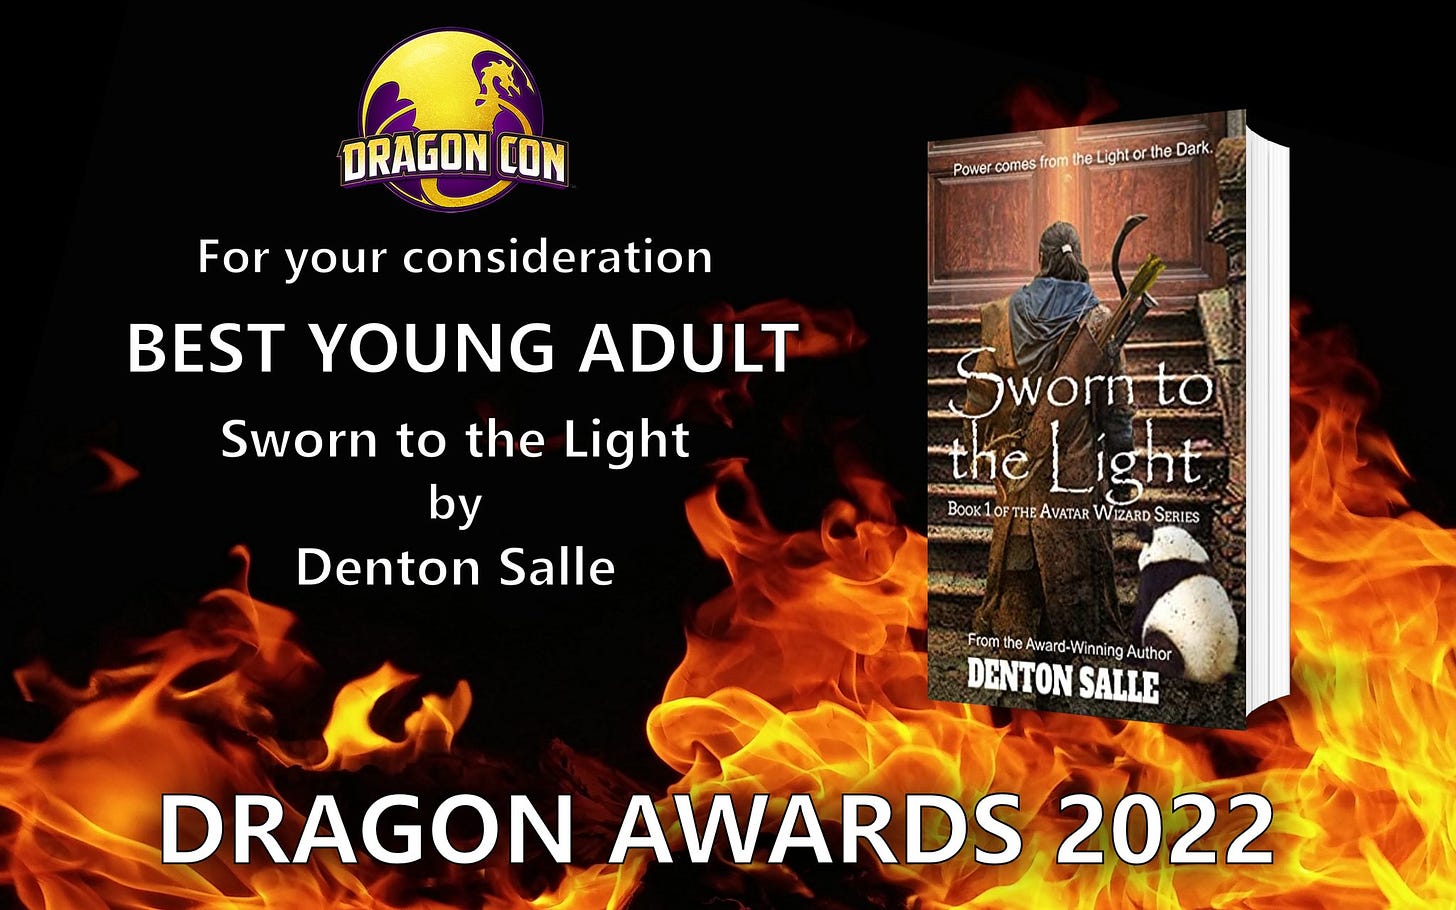 May be a cartoon of 1 person, fire and text that says 'ORAGON CON Power comes from heL the Dark. For your consideration BEST YOUNG ADULT Sworn to the Light by Denton Salle Swornto the Light AVATAR NIZARDSE ERIES M Fron Award- d Winning Author DENTON SALLE DRAGON AWARDS 2022'